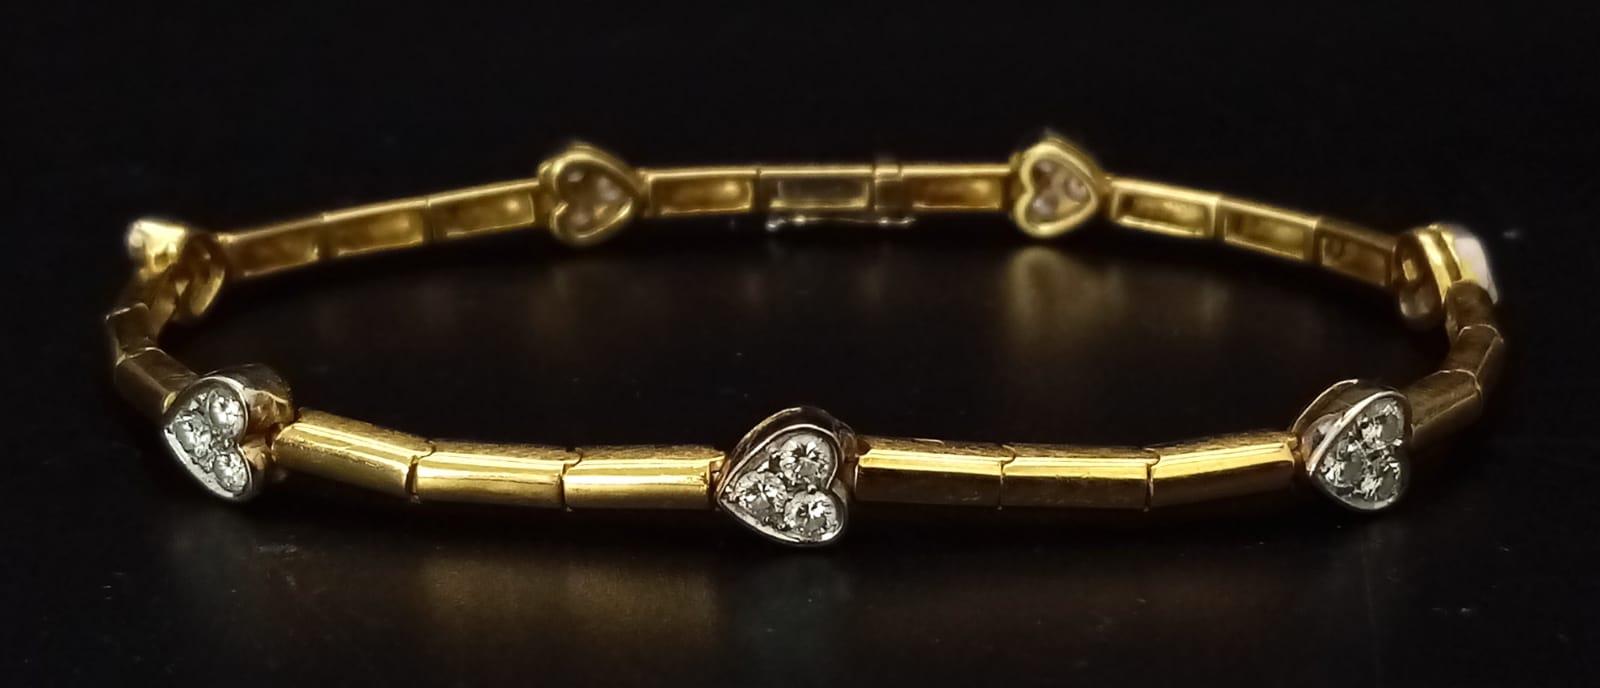 A Gorgeous 18K Gold and Heart-Diamond Necklace and Bracelet Set. The necklace is decorated with - Image 11 of 21